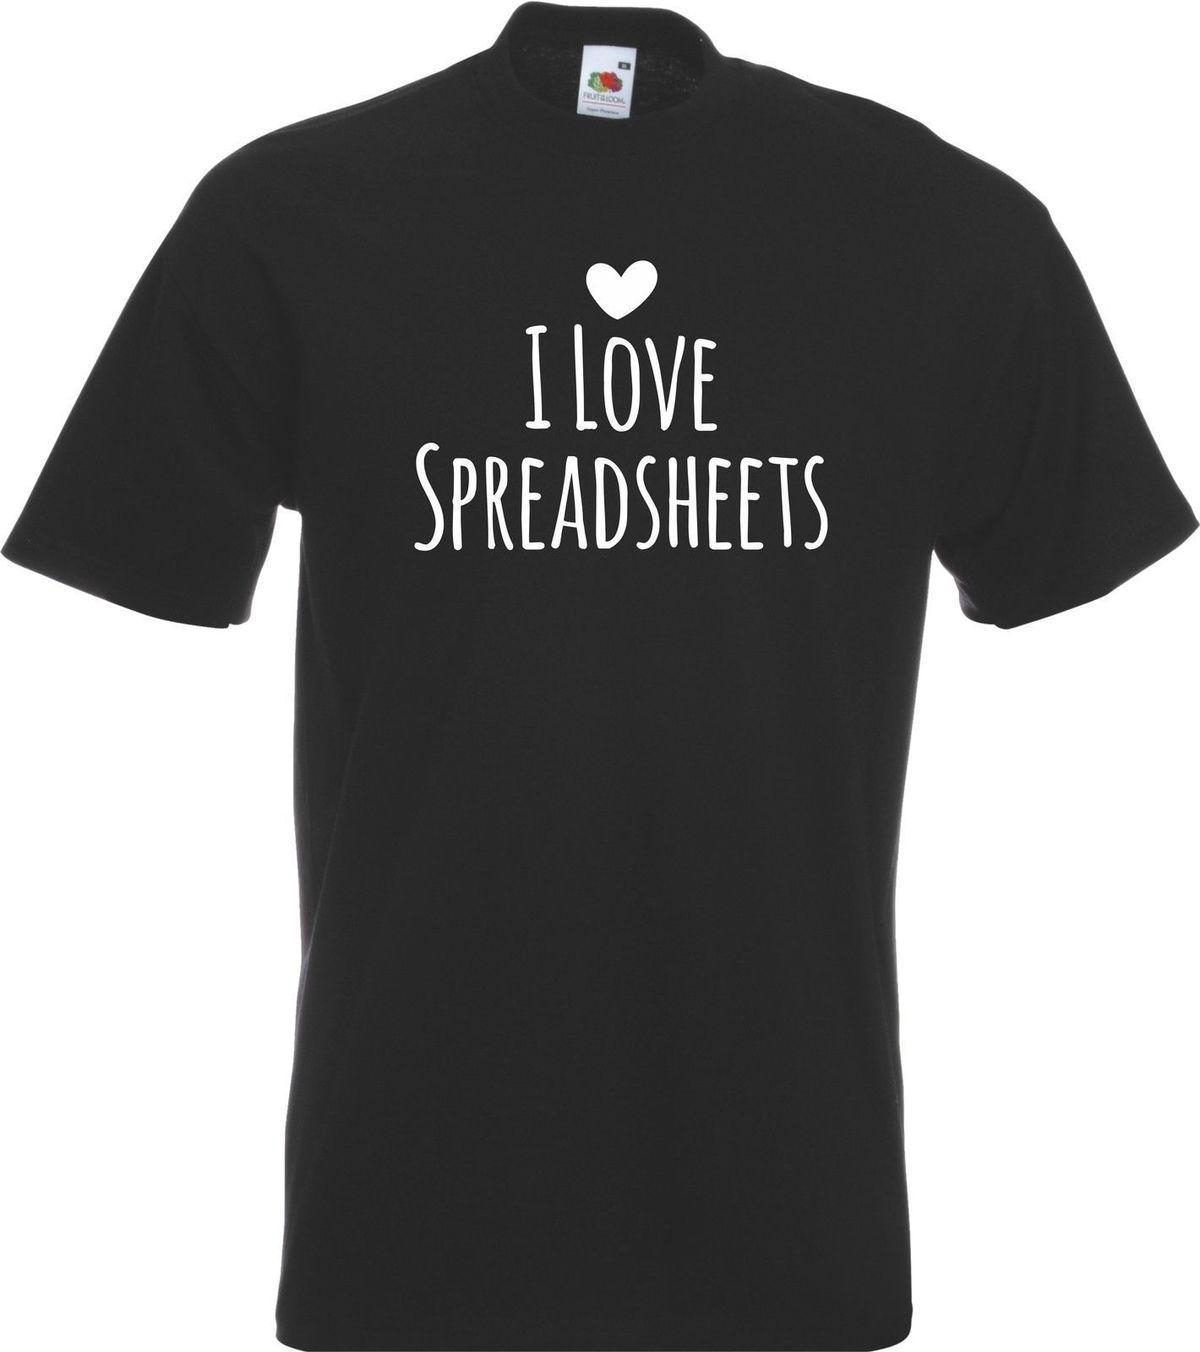 I Love Spreadsheets Shirt For I Love Spreadsheets Computer Geek Programmer It Tech Funny T Shirt T